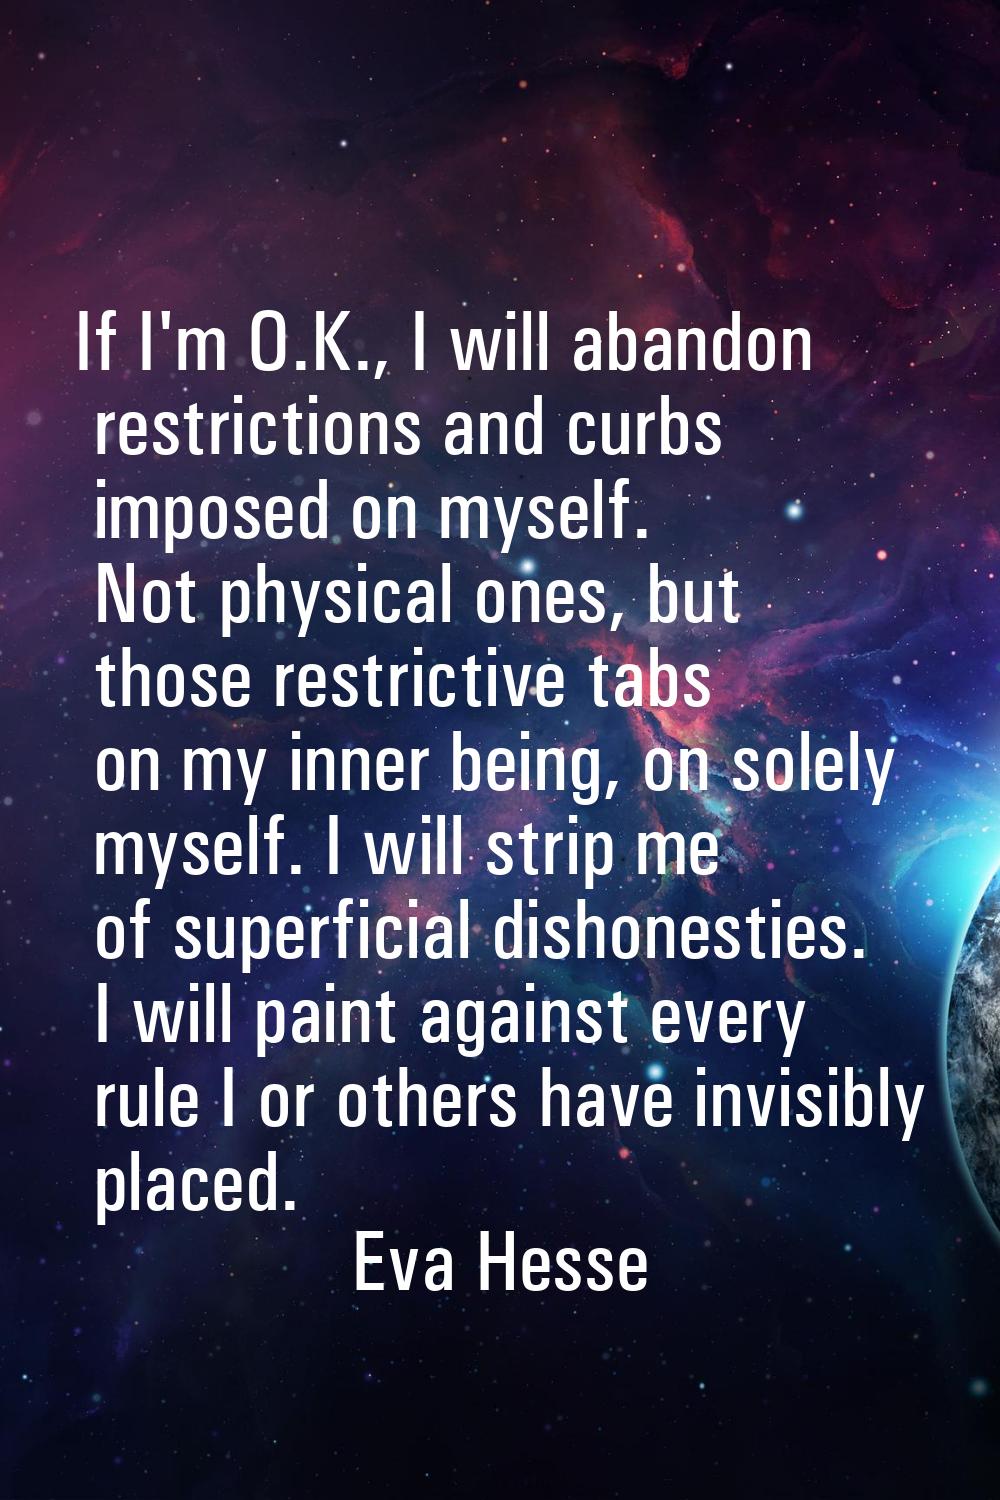 If I'm O.K., I will abandon restrictions and curbs imposed on myself. Not physical ones, but those 